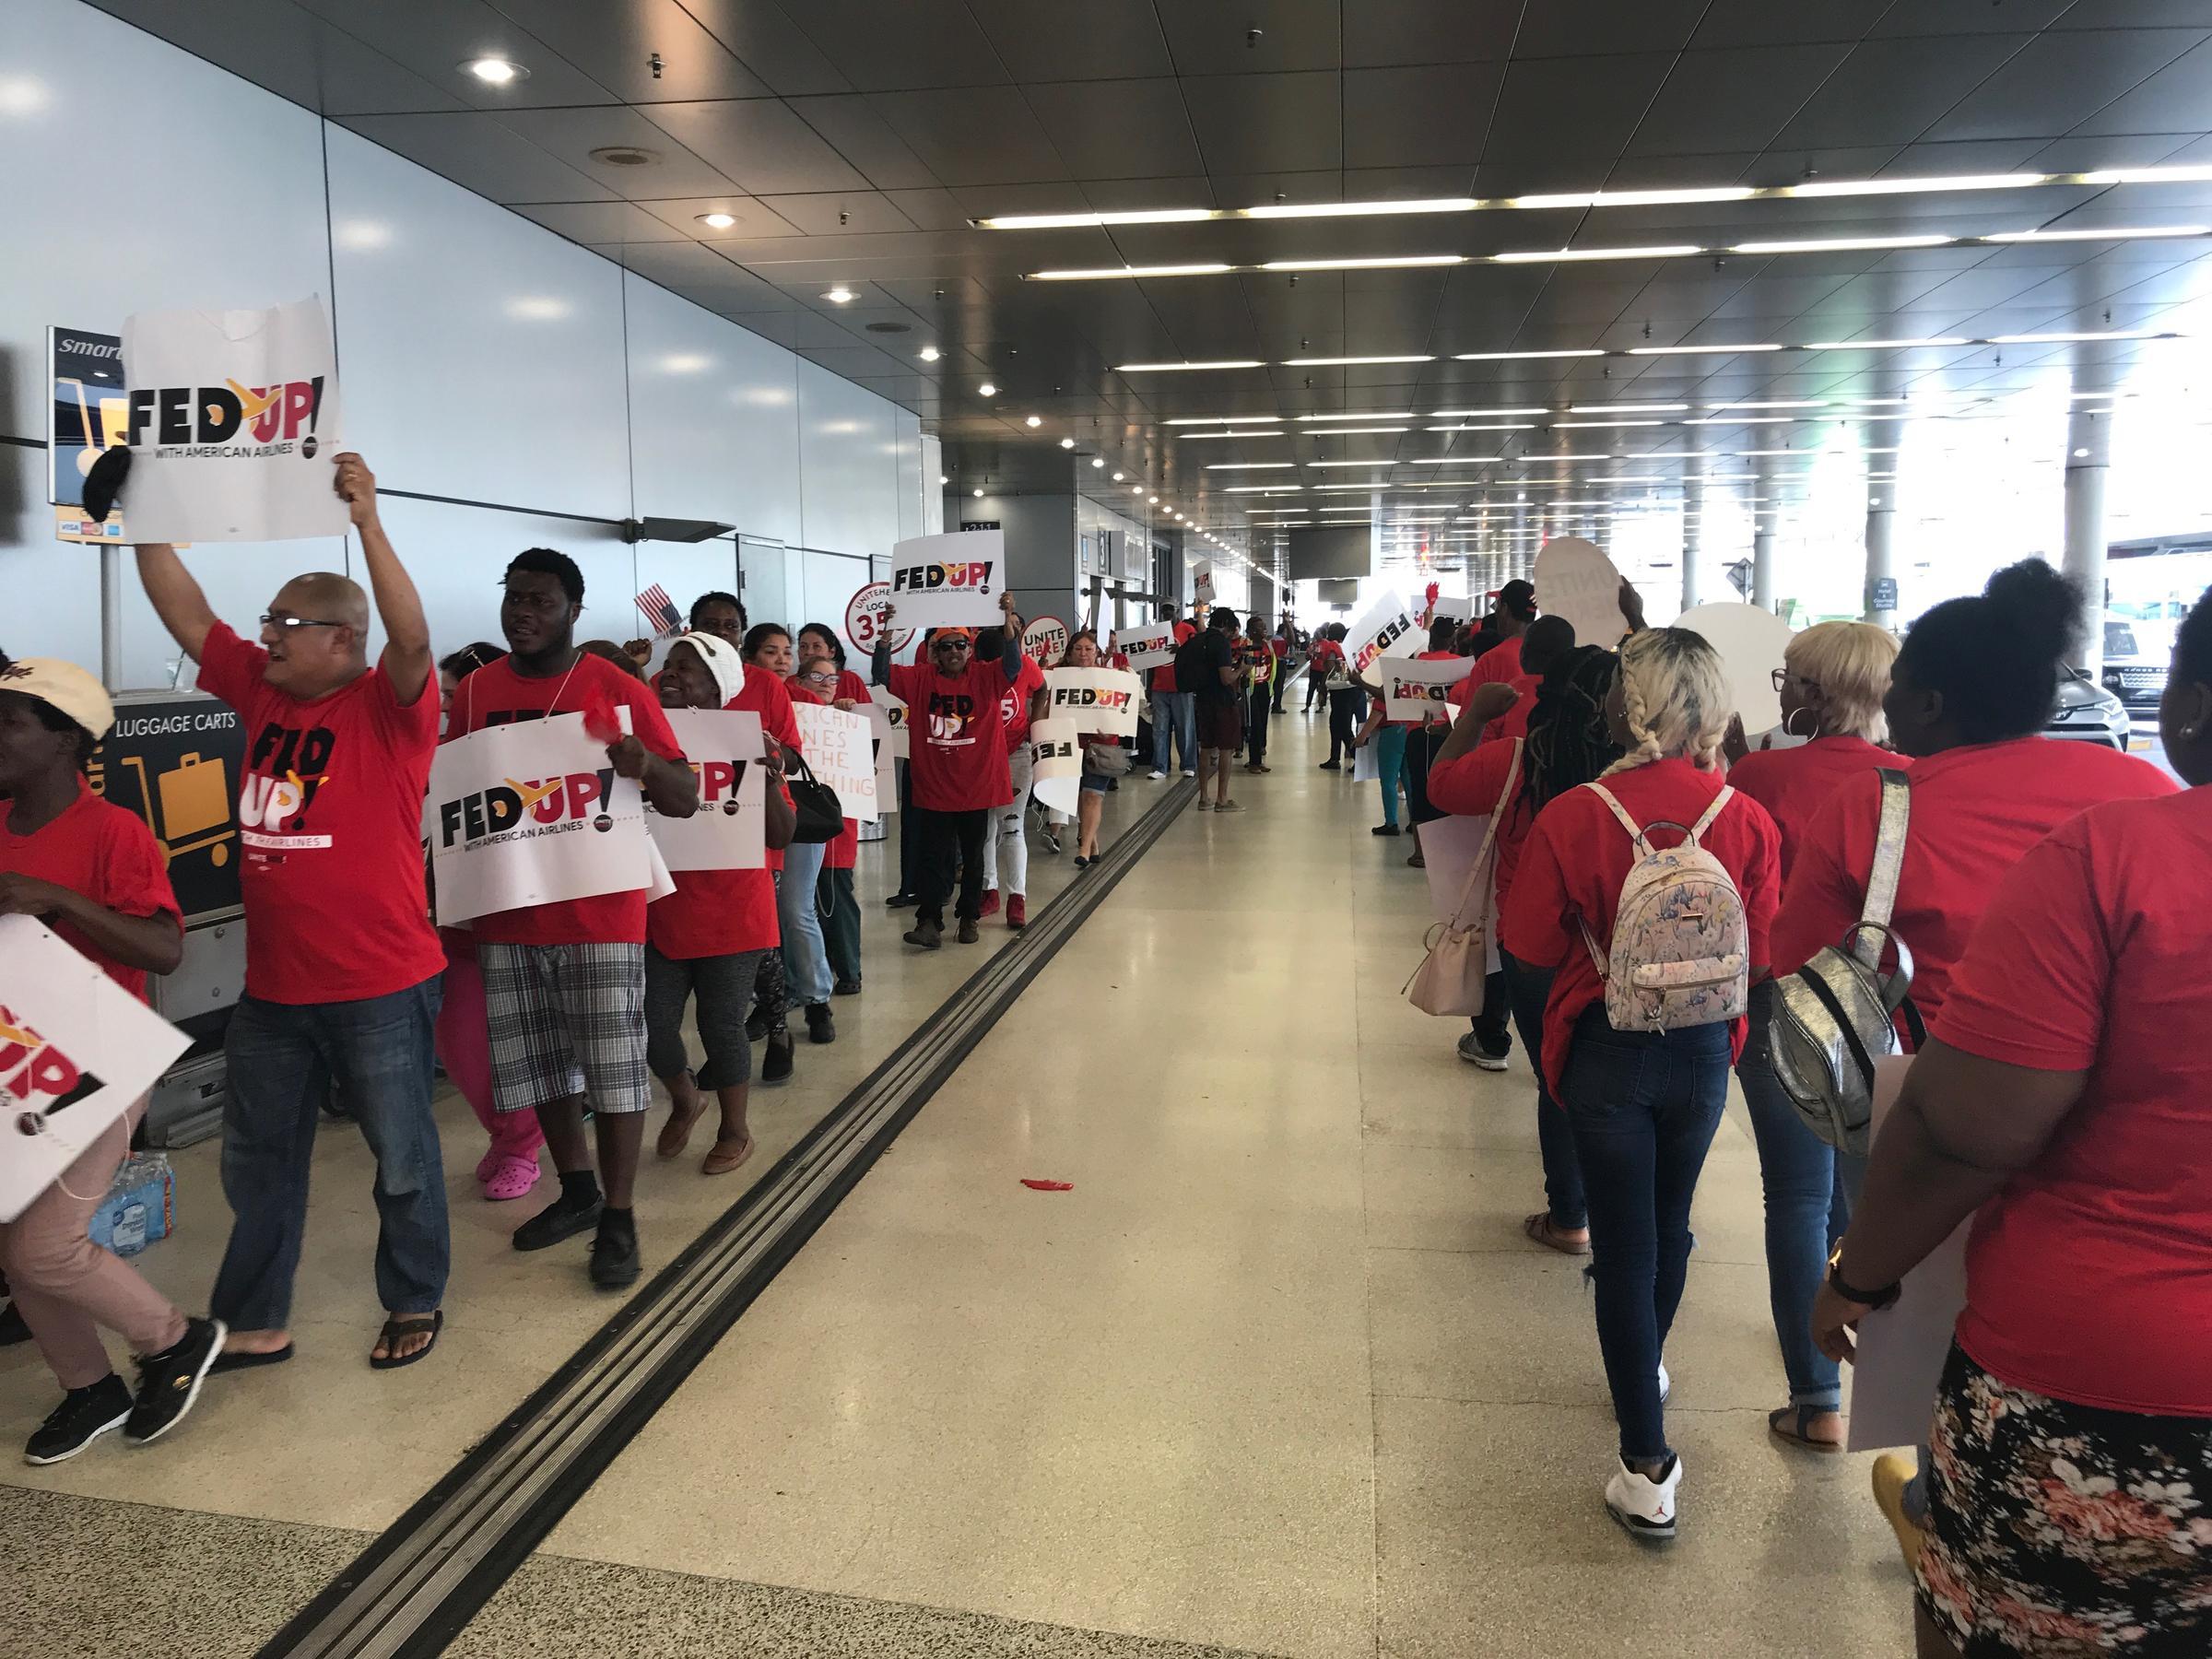 Miami International Airport Logo - Miami International Airport Workers Rally For Higher Wages | WLRN